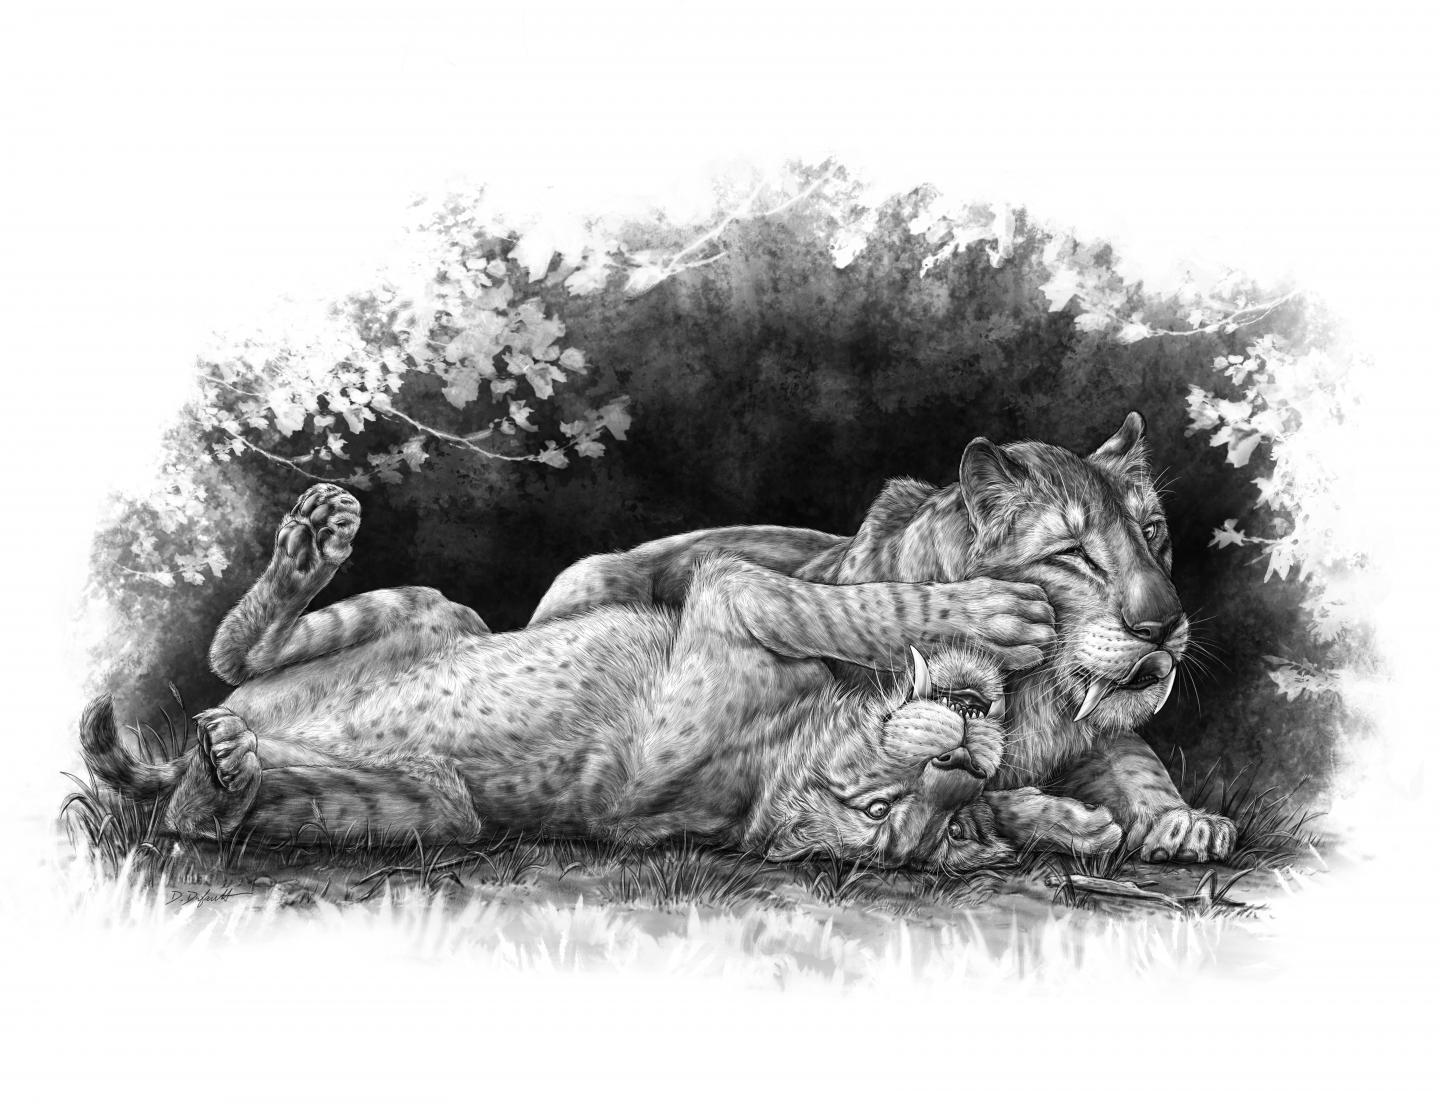 Illustration of Smilodon fatalis cubs playing together.